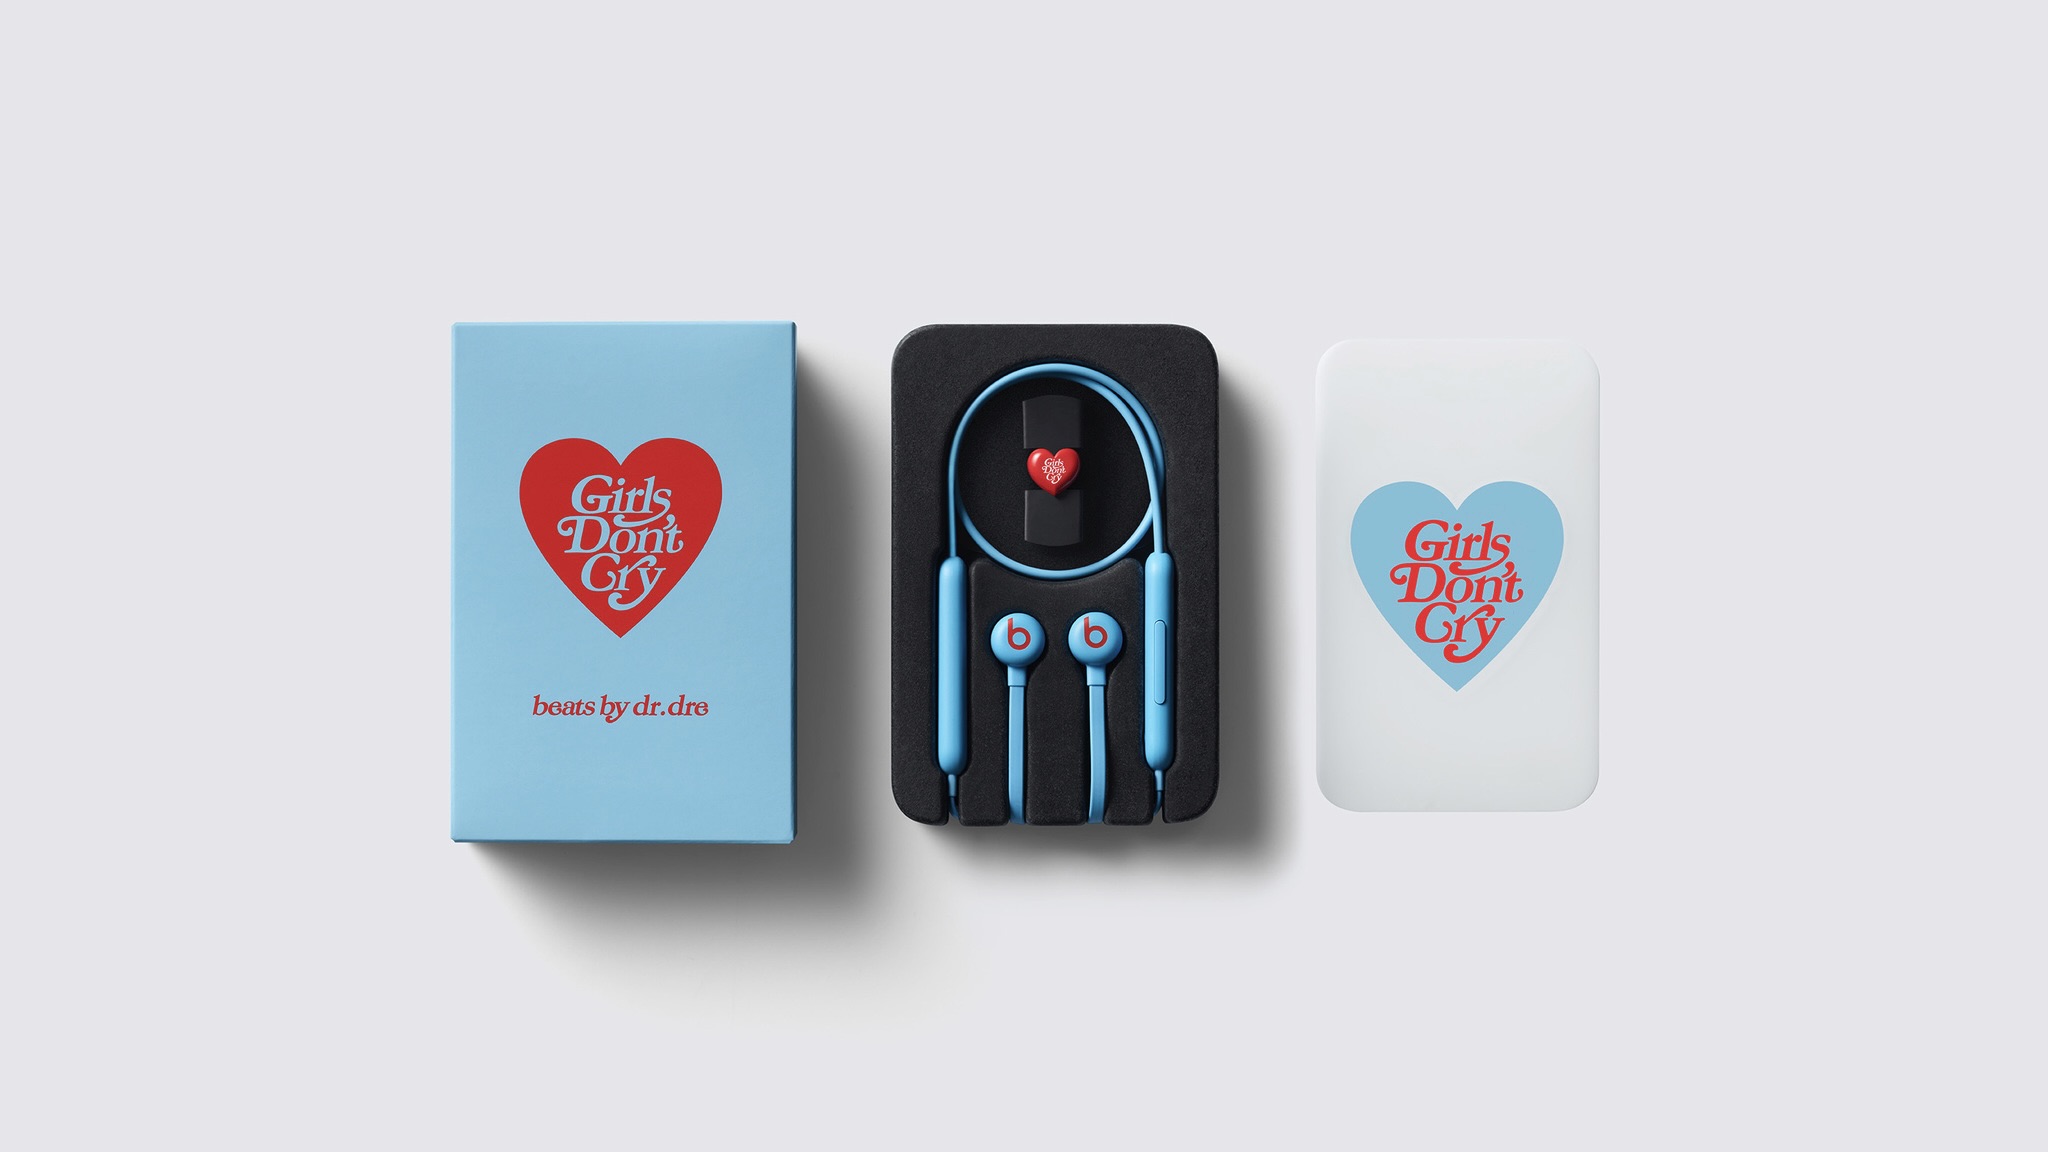 Beats teams up with 'Girls Don't Cry' for special edition Beats 